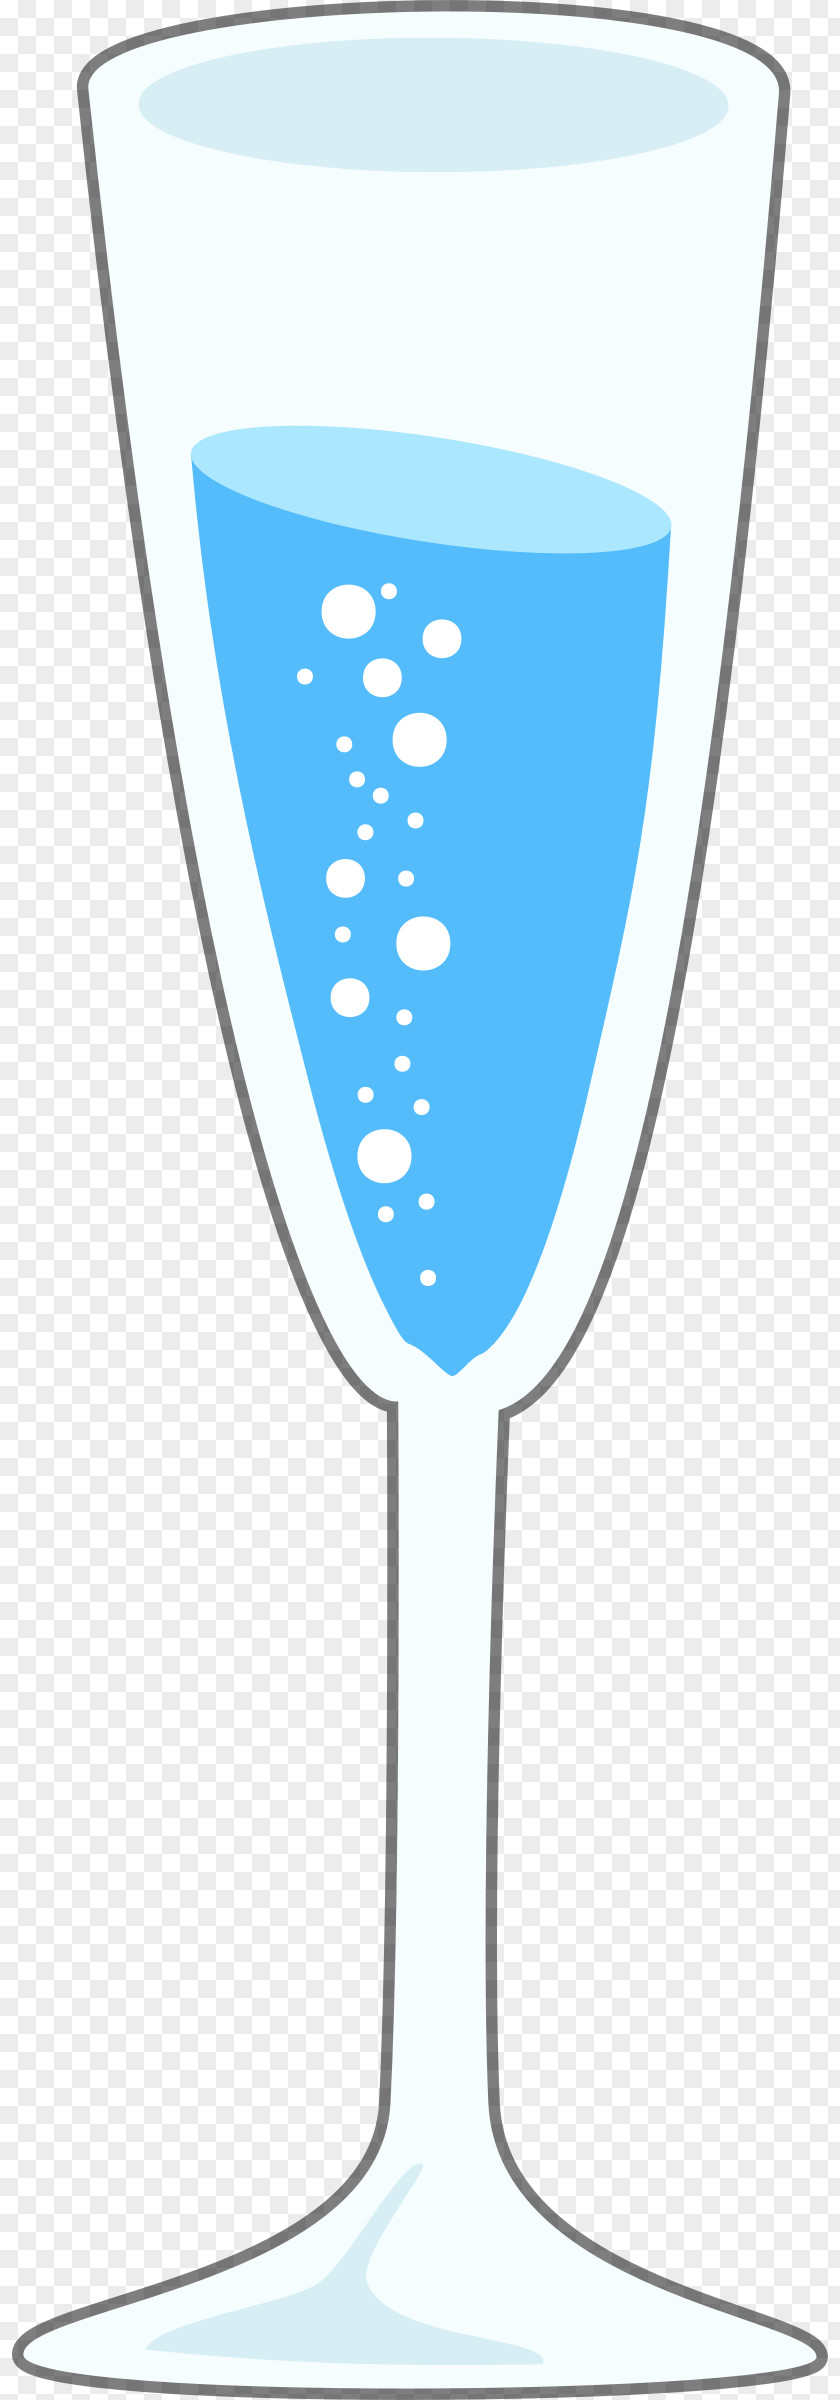 Sparkling Carbonated Water Champagne Glass Clip Art PNG